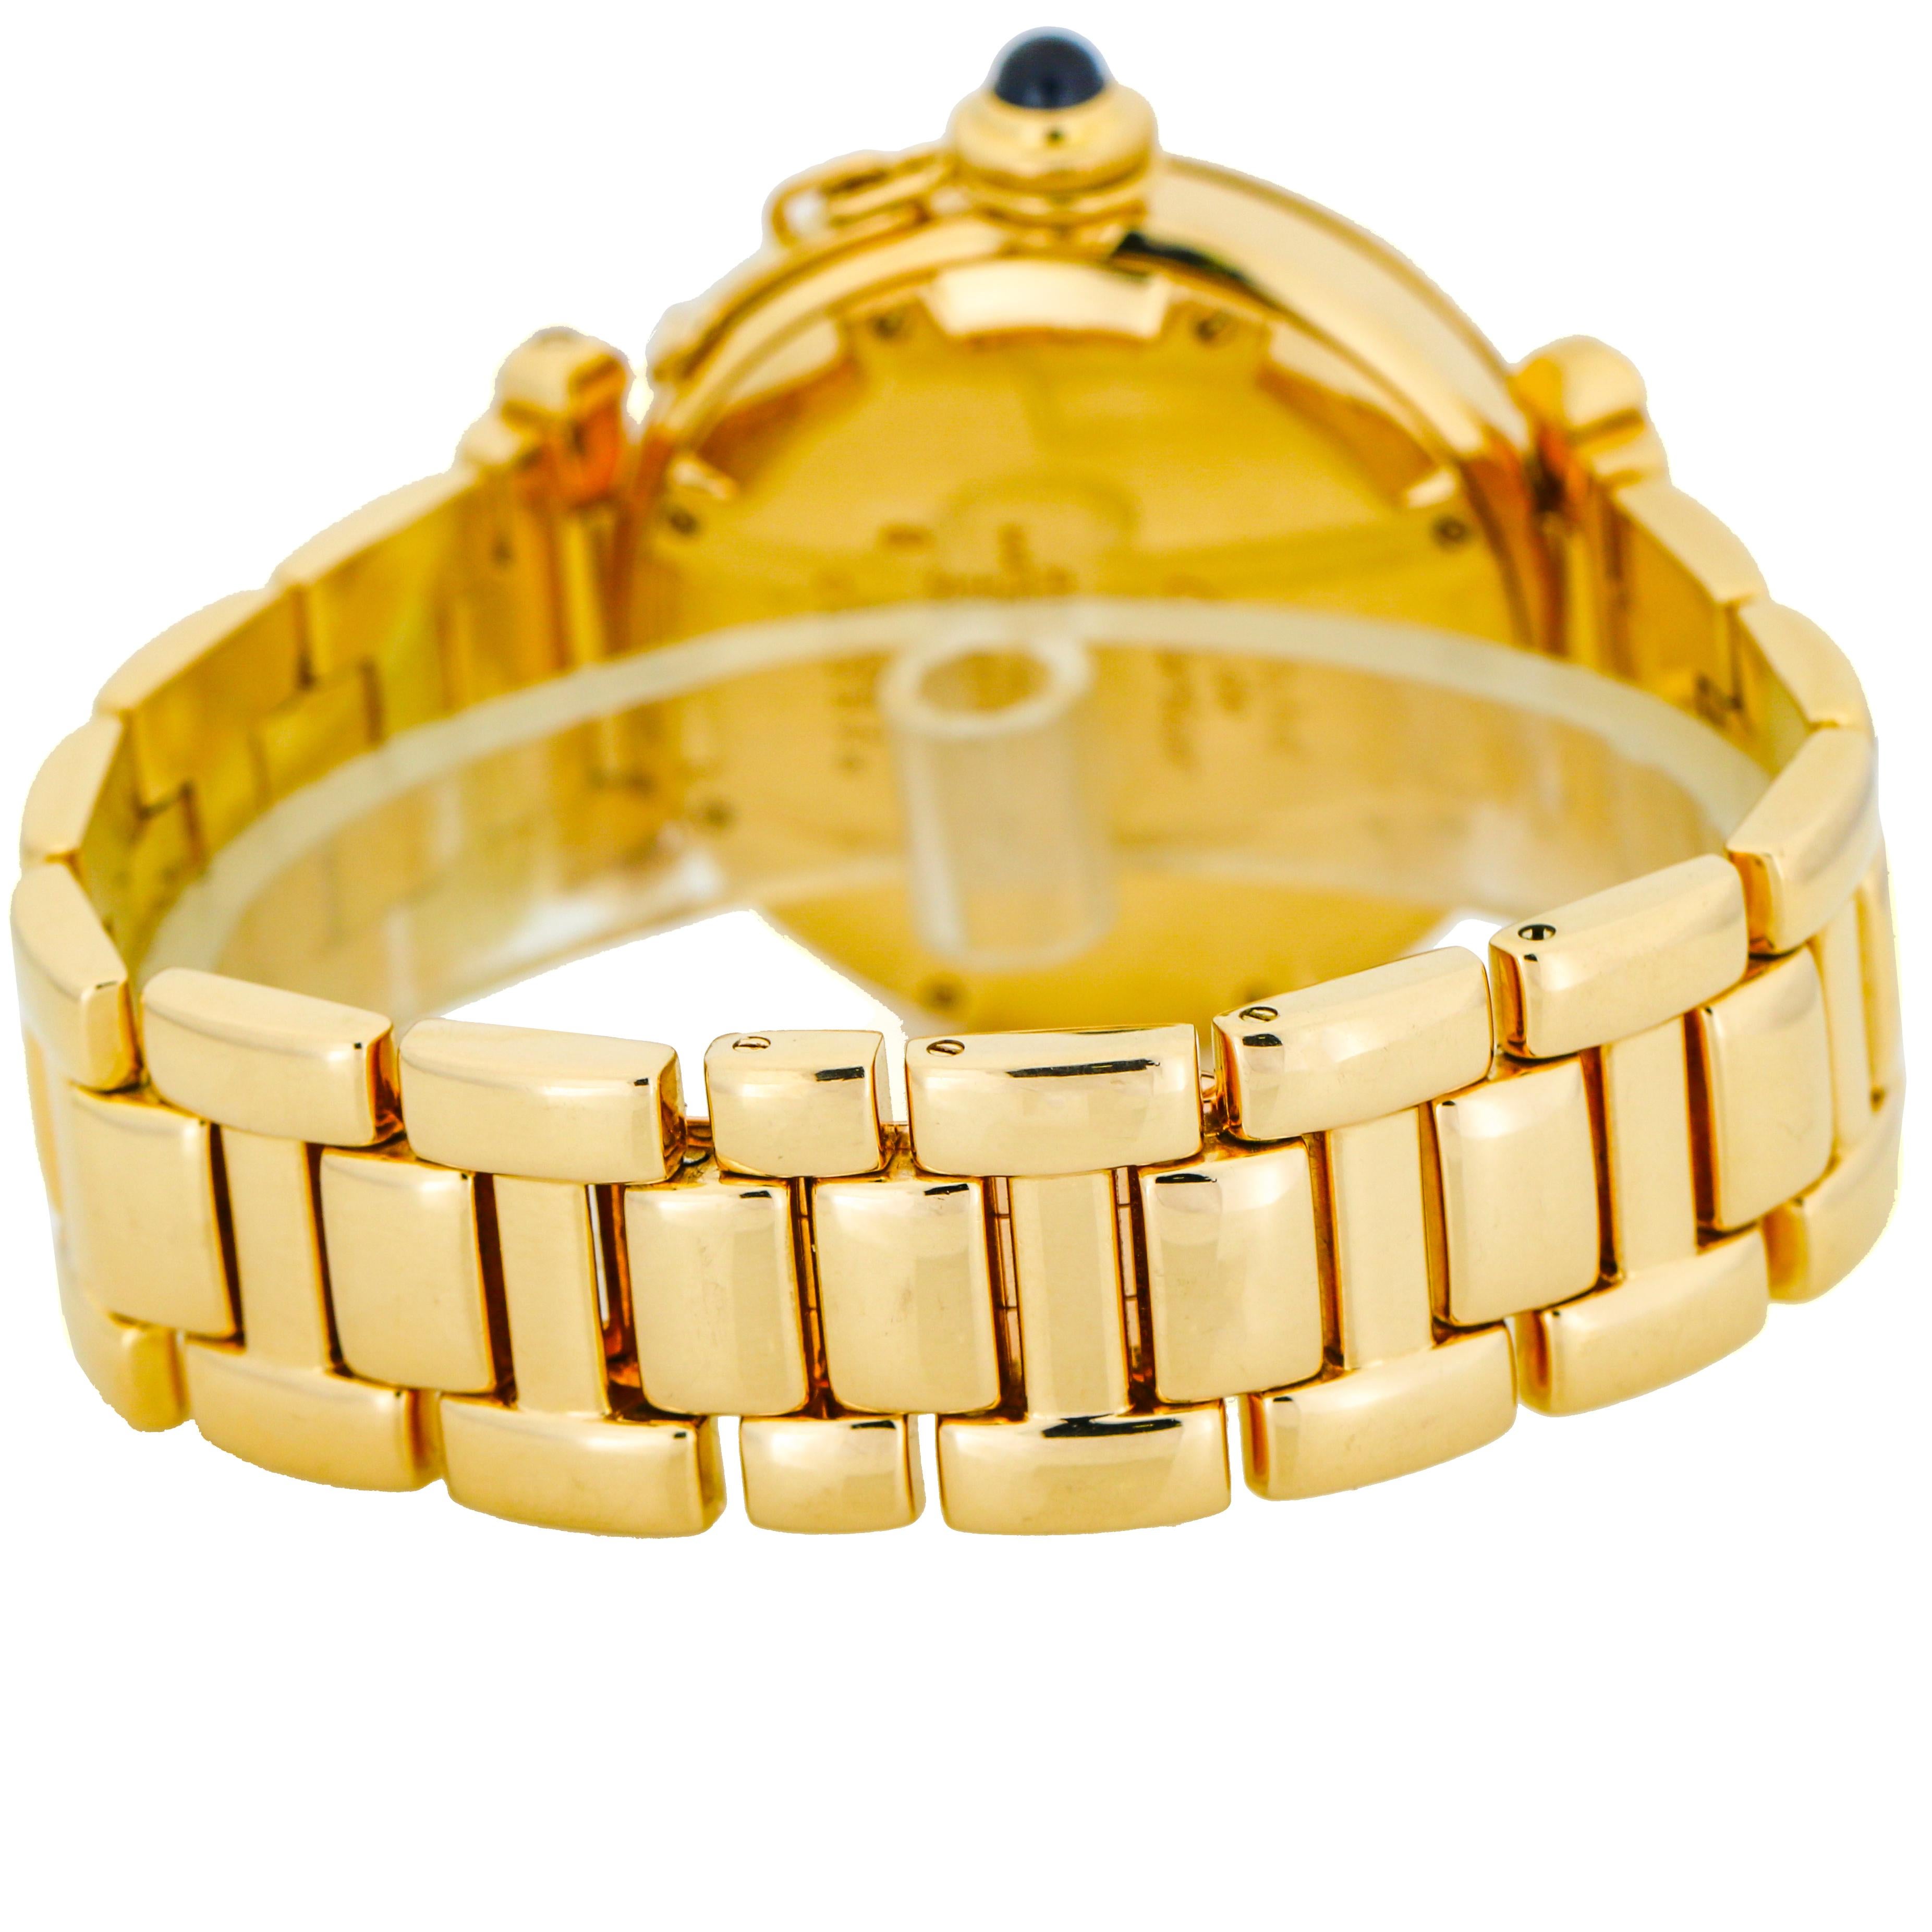 Cartier Pasha 18 Karat Yellow Gold Automatic Watch For Sale 3